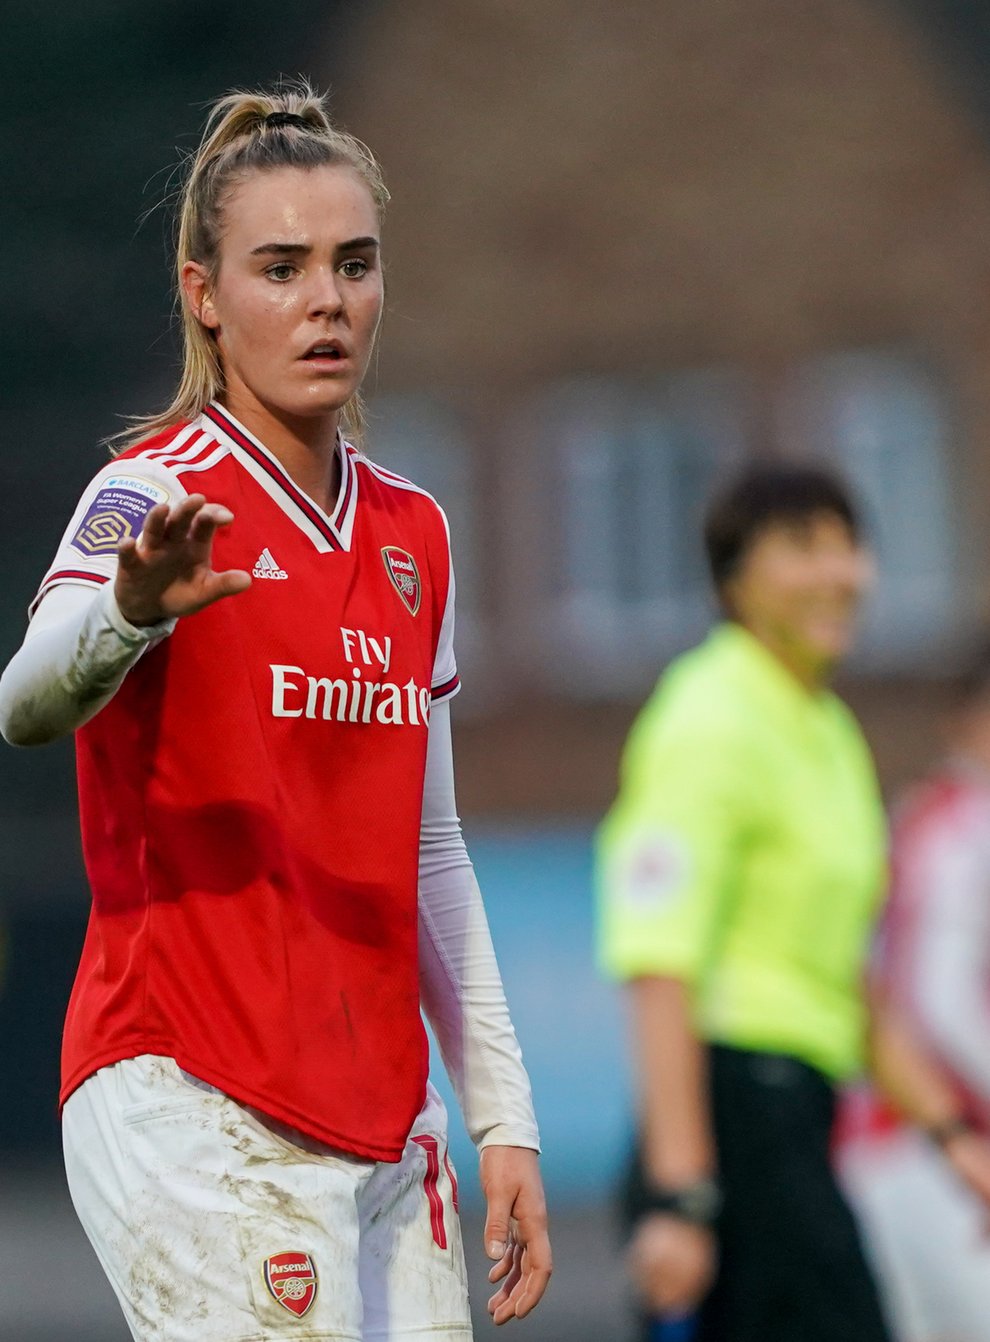 Jill Roord bagged herself a hat-trick as Arsenal dismantled Reading 6-1